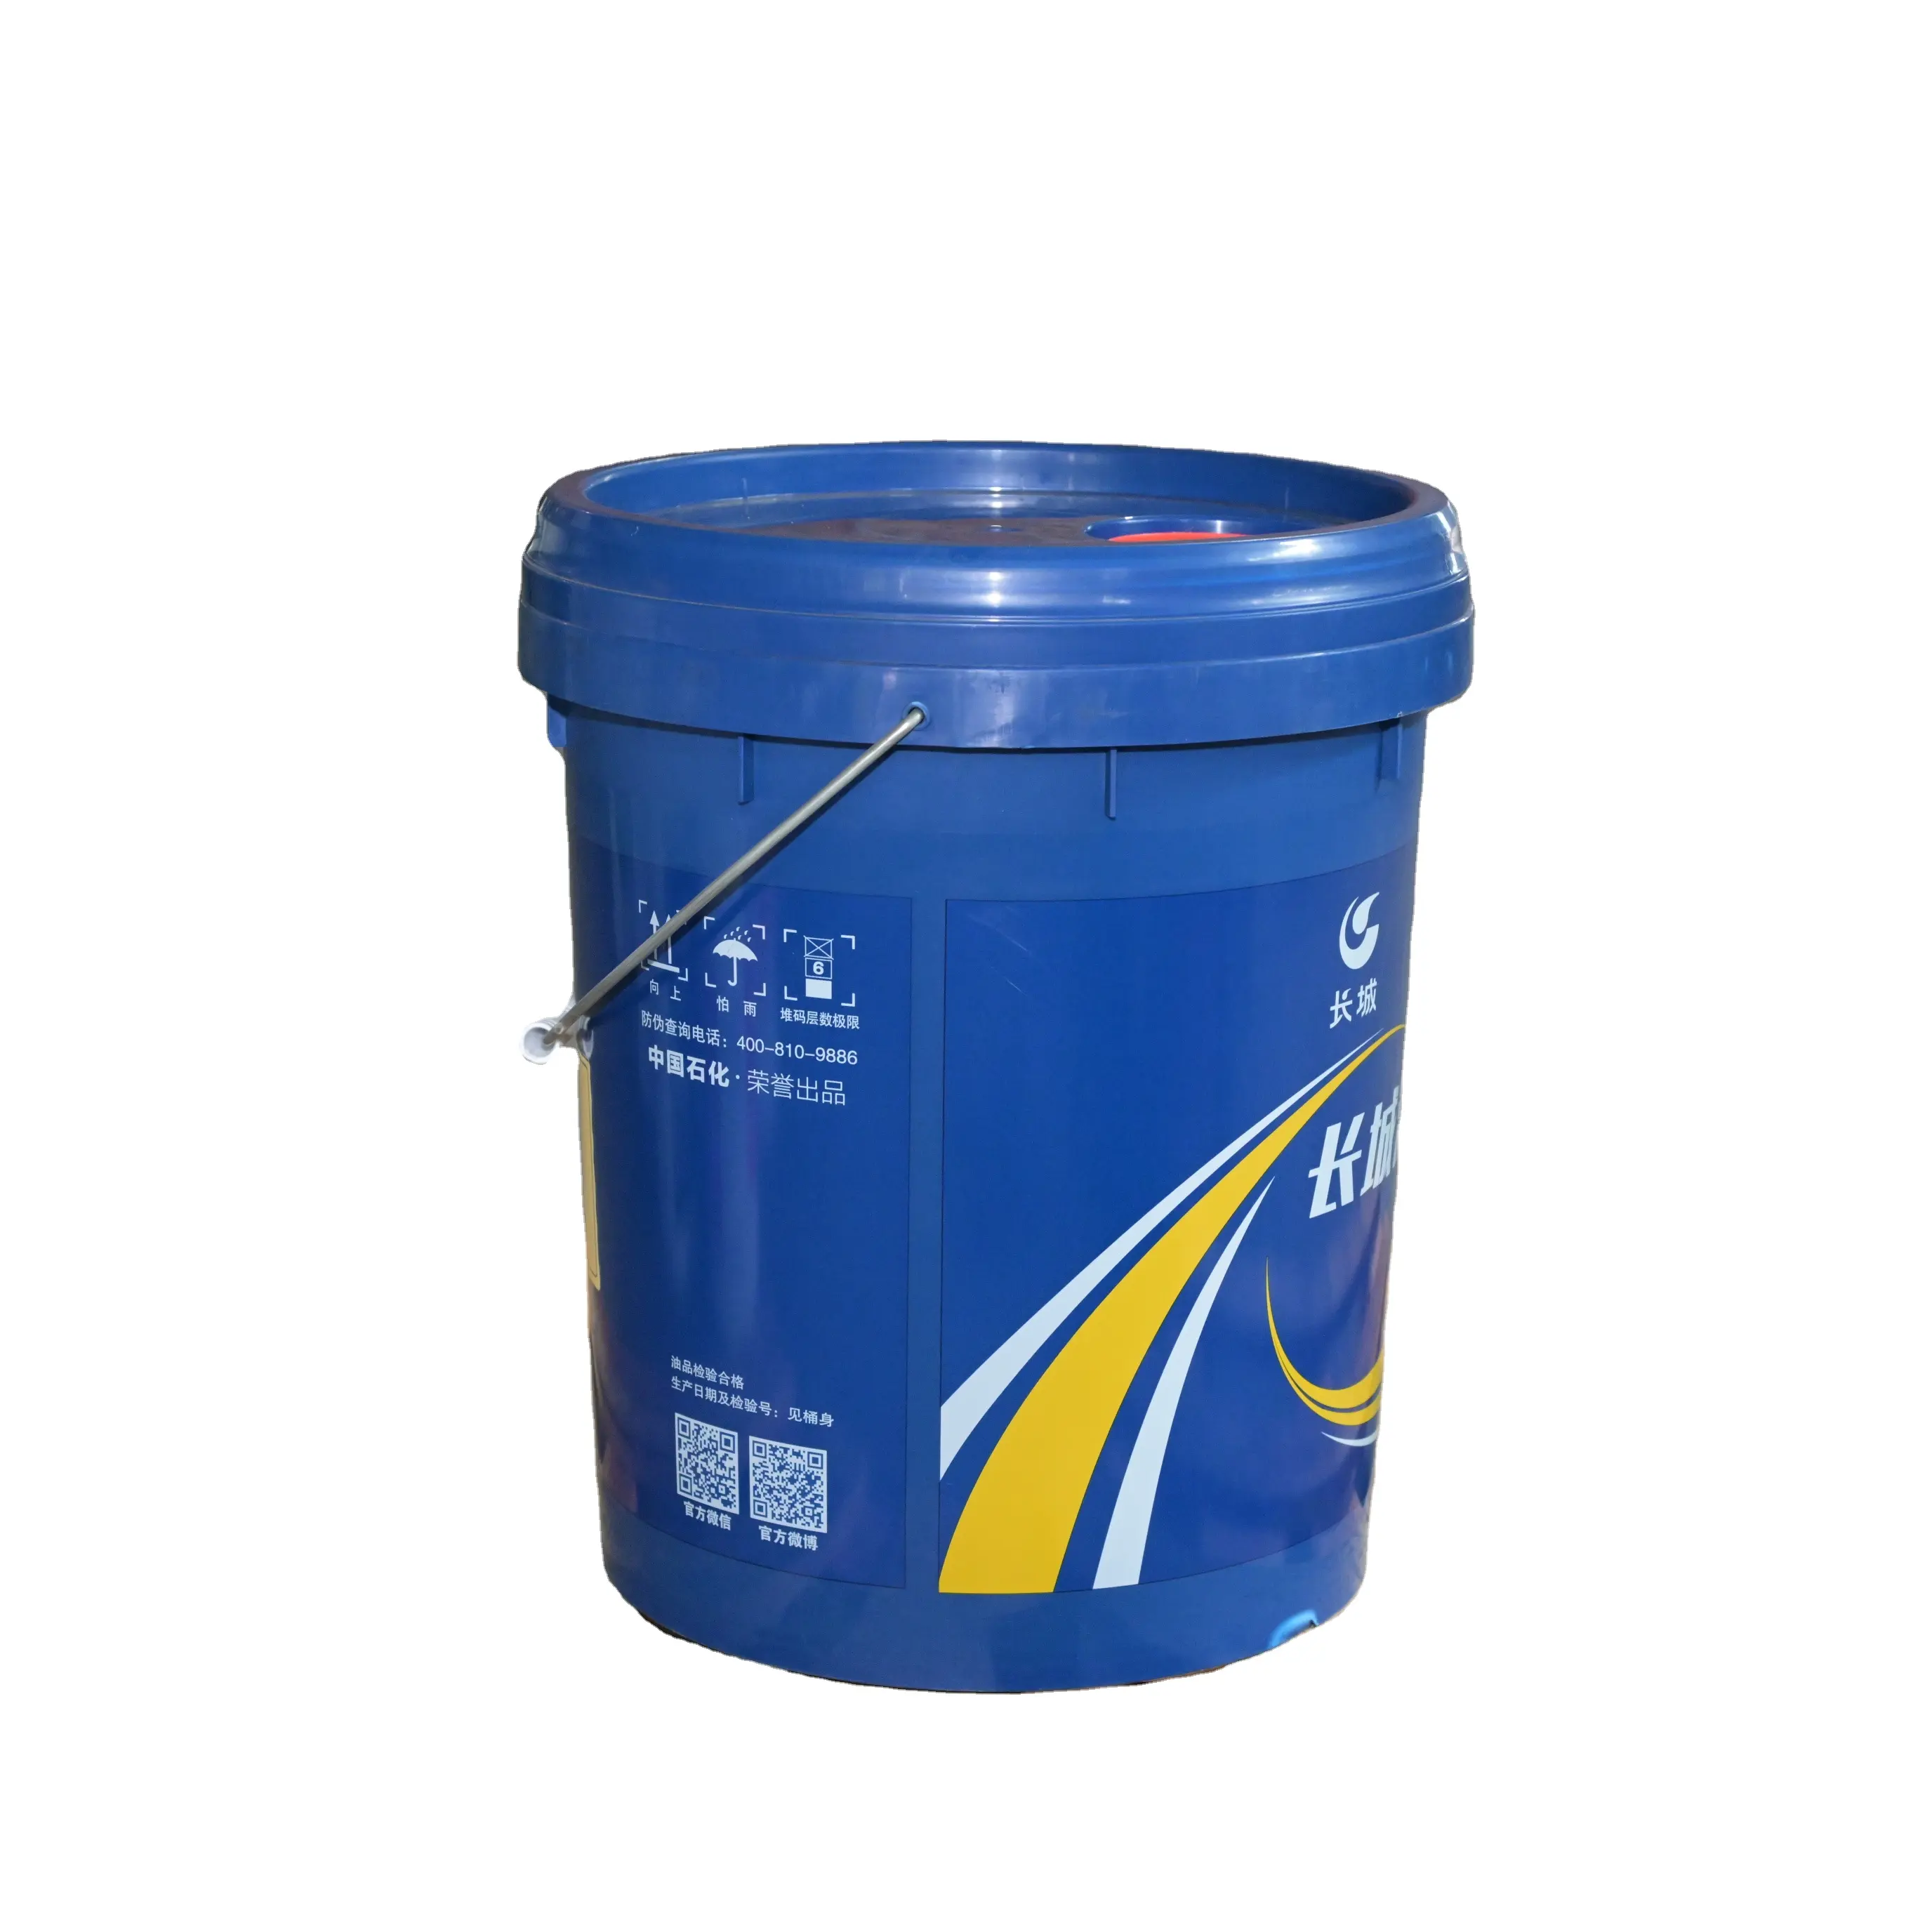 Thermal oxidation stability L-CKD 150# industrial closed gear oil for medium load mechanical circulation lubrication system